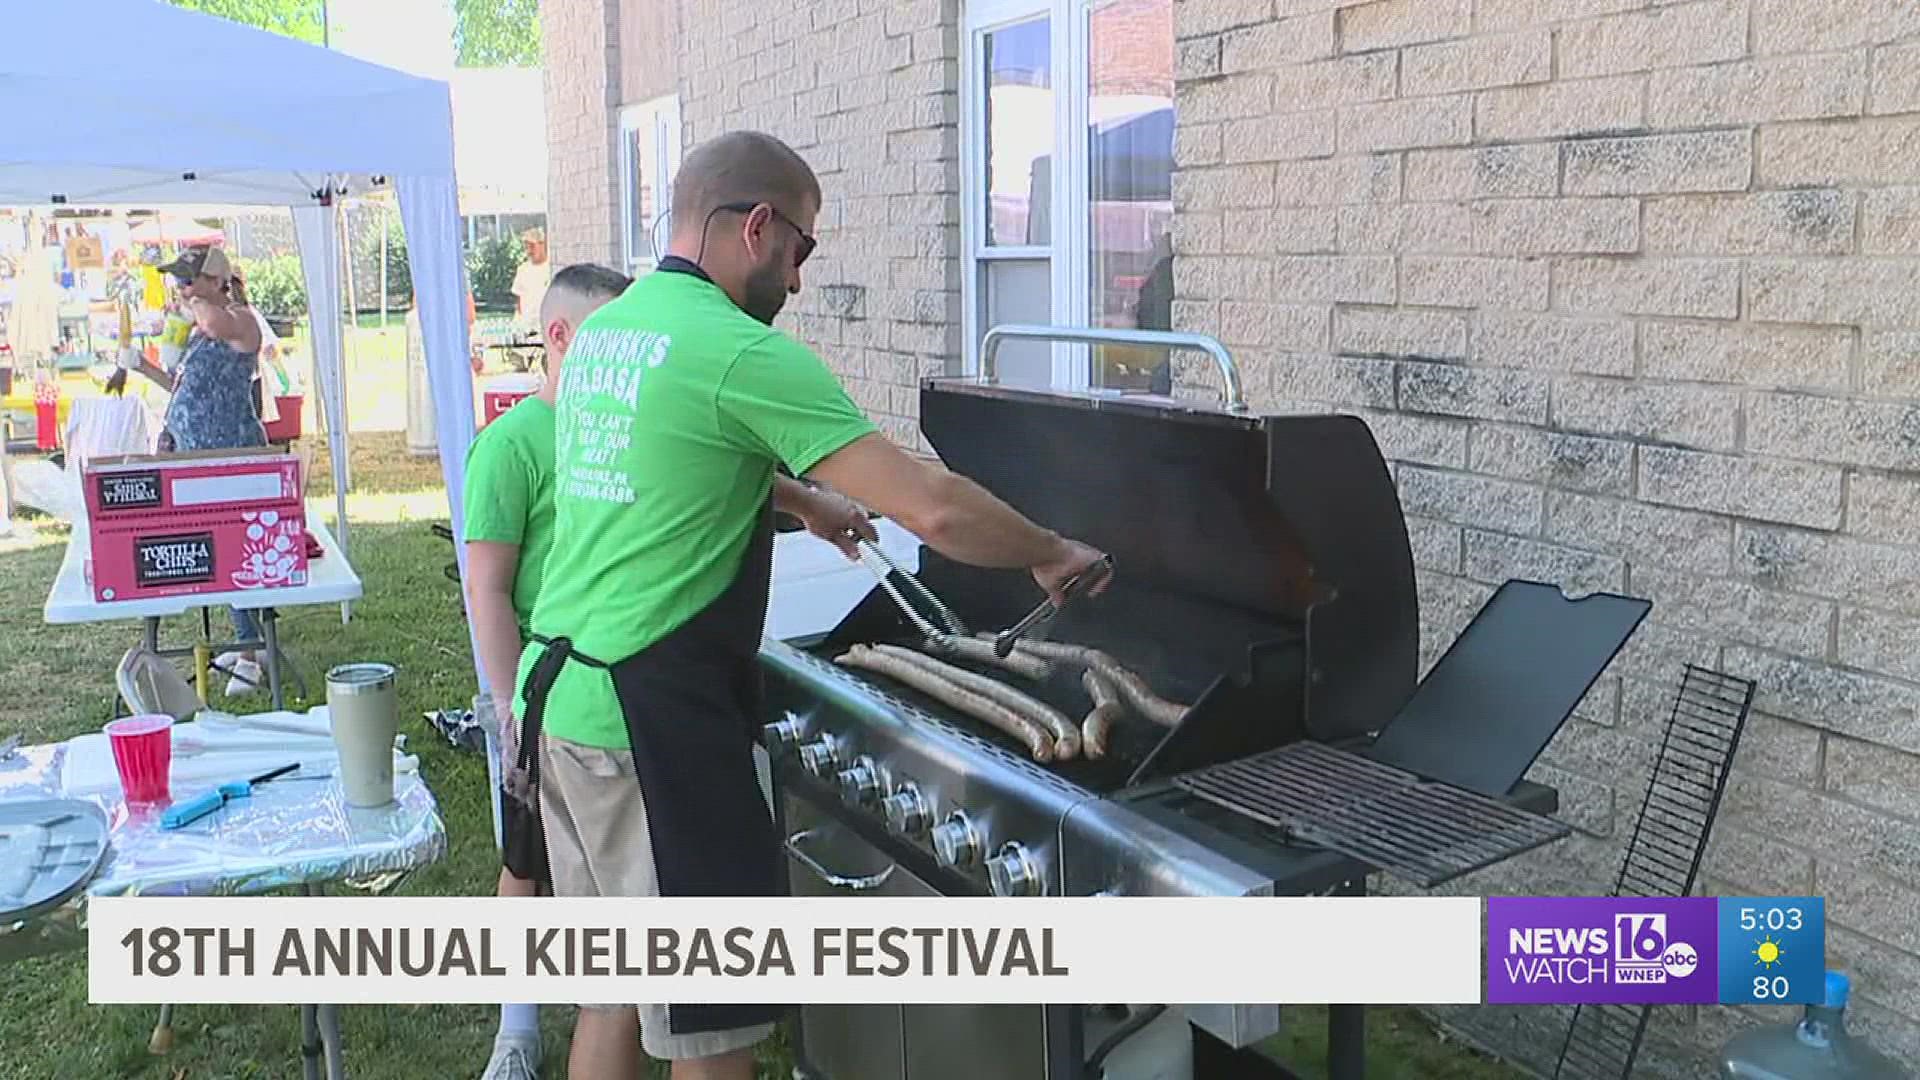 Kielbasa is a beloved food here in northeastern and central Pennsylvania, so it's no surprise there's a festival dedicated to it in Luzerne County.